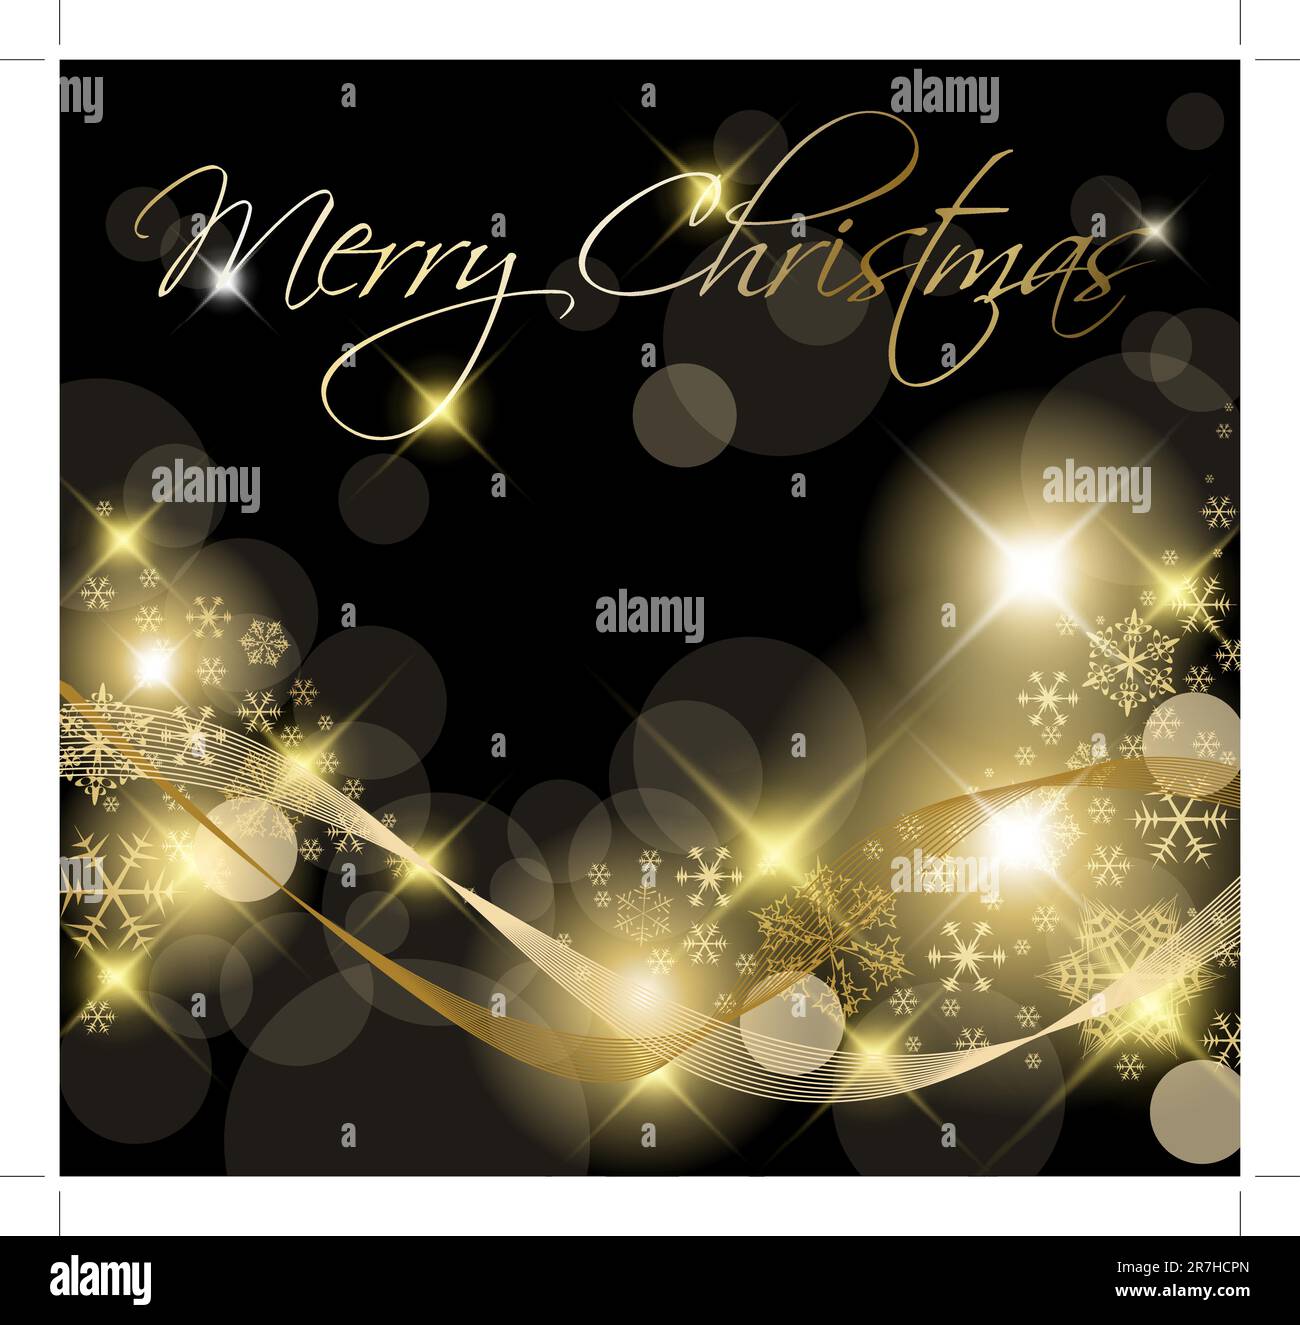 Black and Golden Christmas background / card with snowflakes Stock Vector